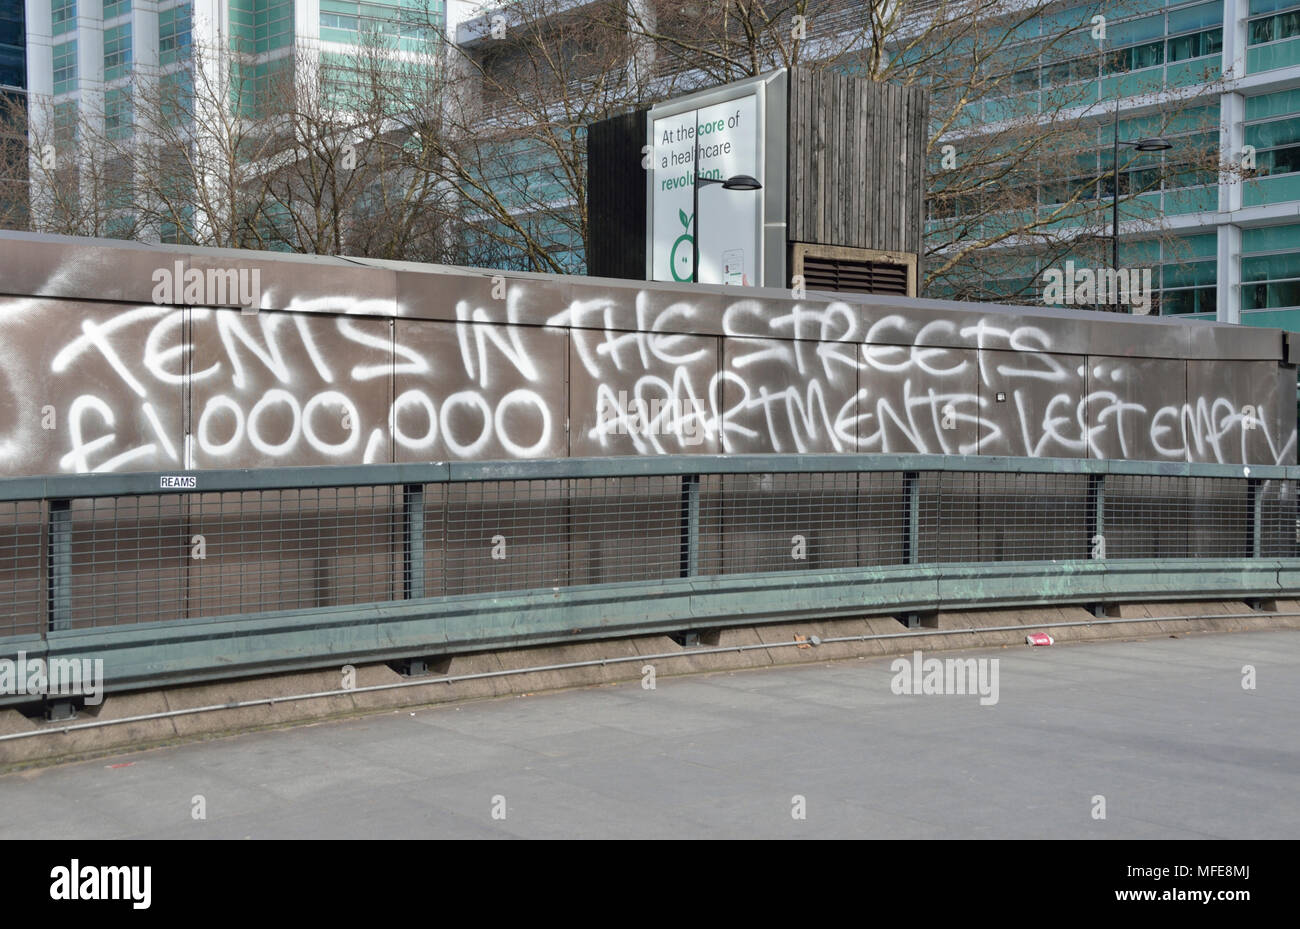 ’ Tents on the streets, million pound apartments left empty’ written on a wall, London, UK. Stock Photo